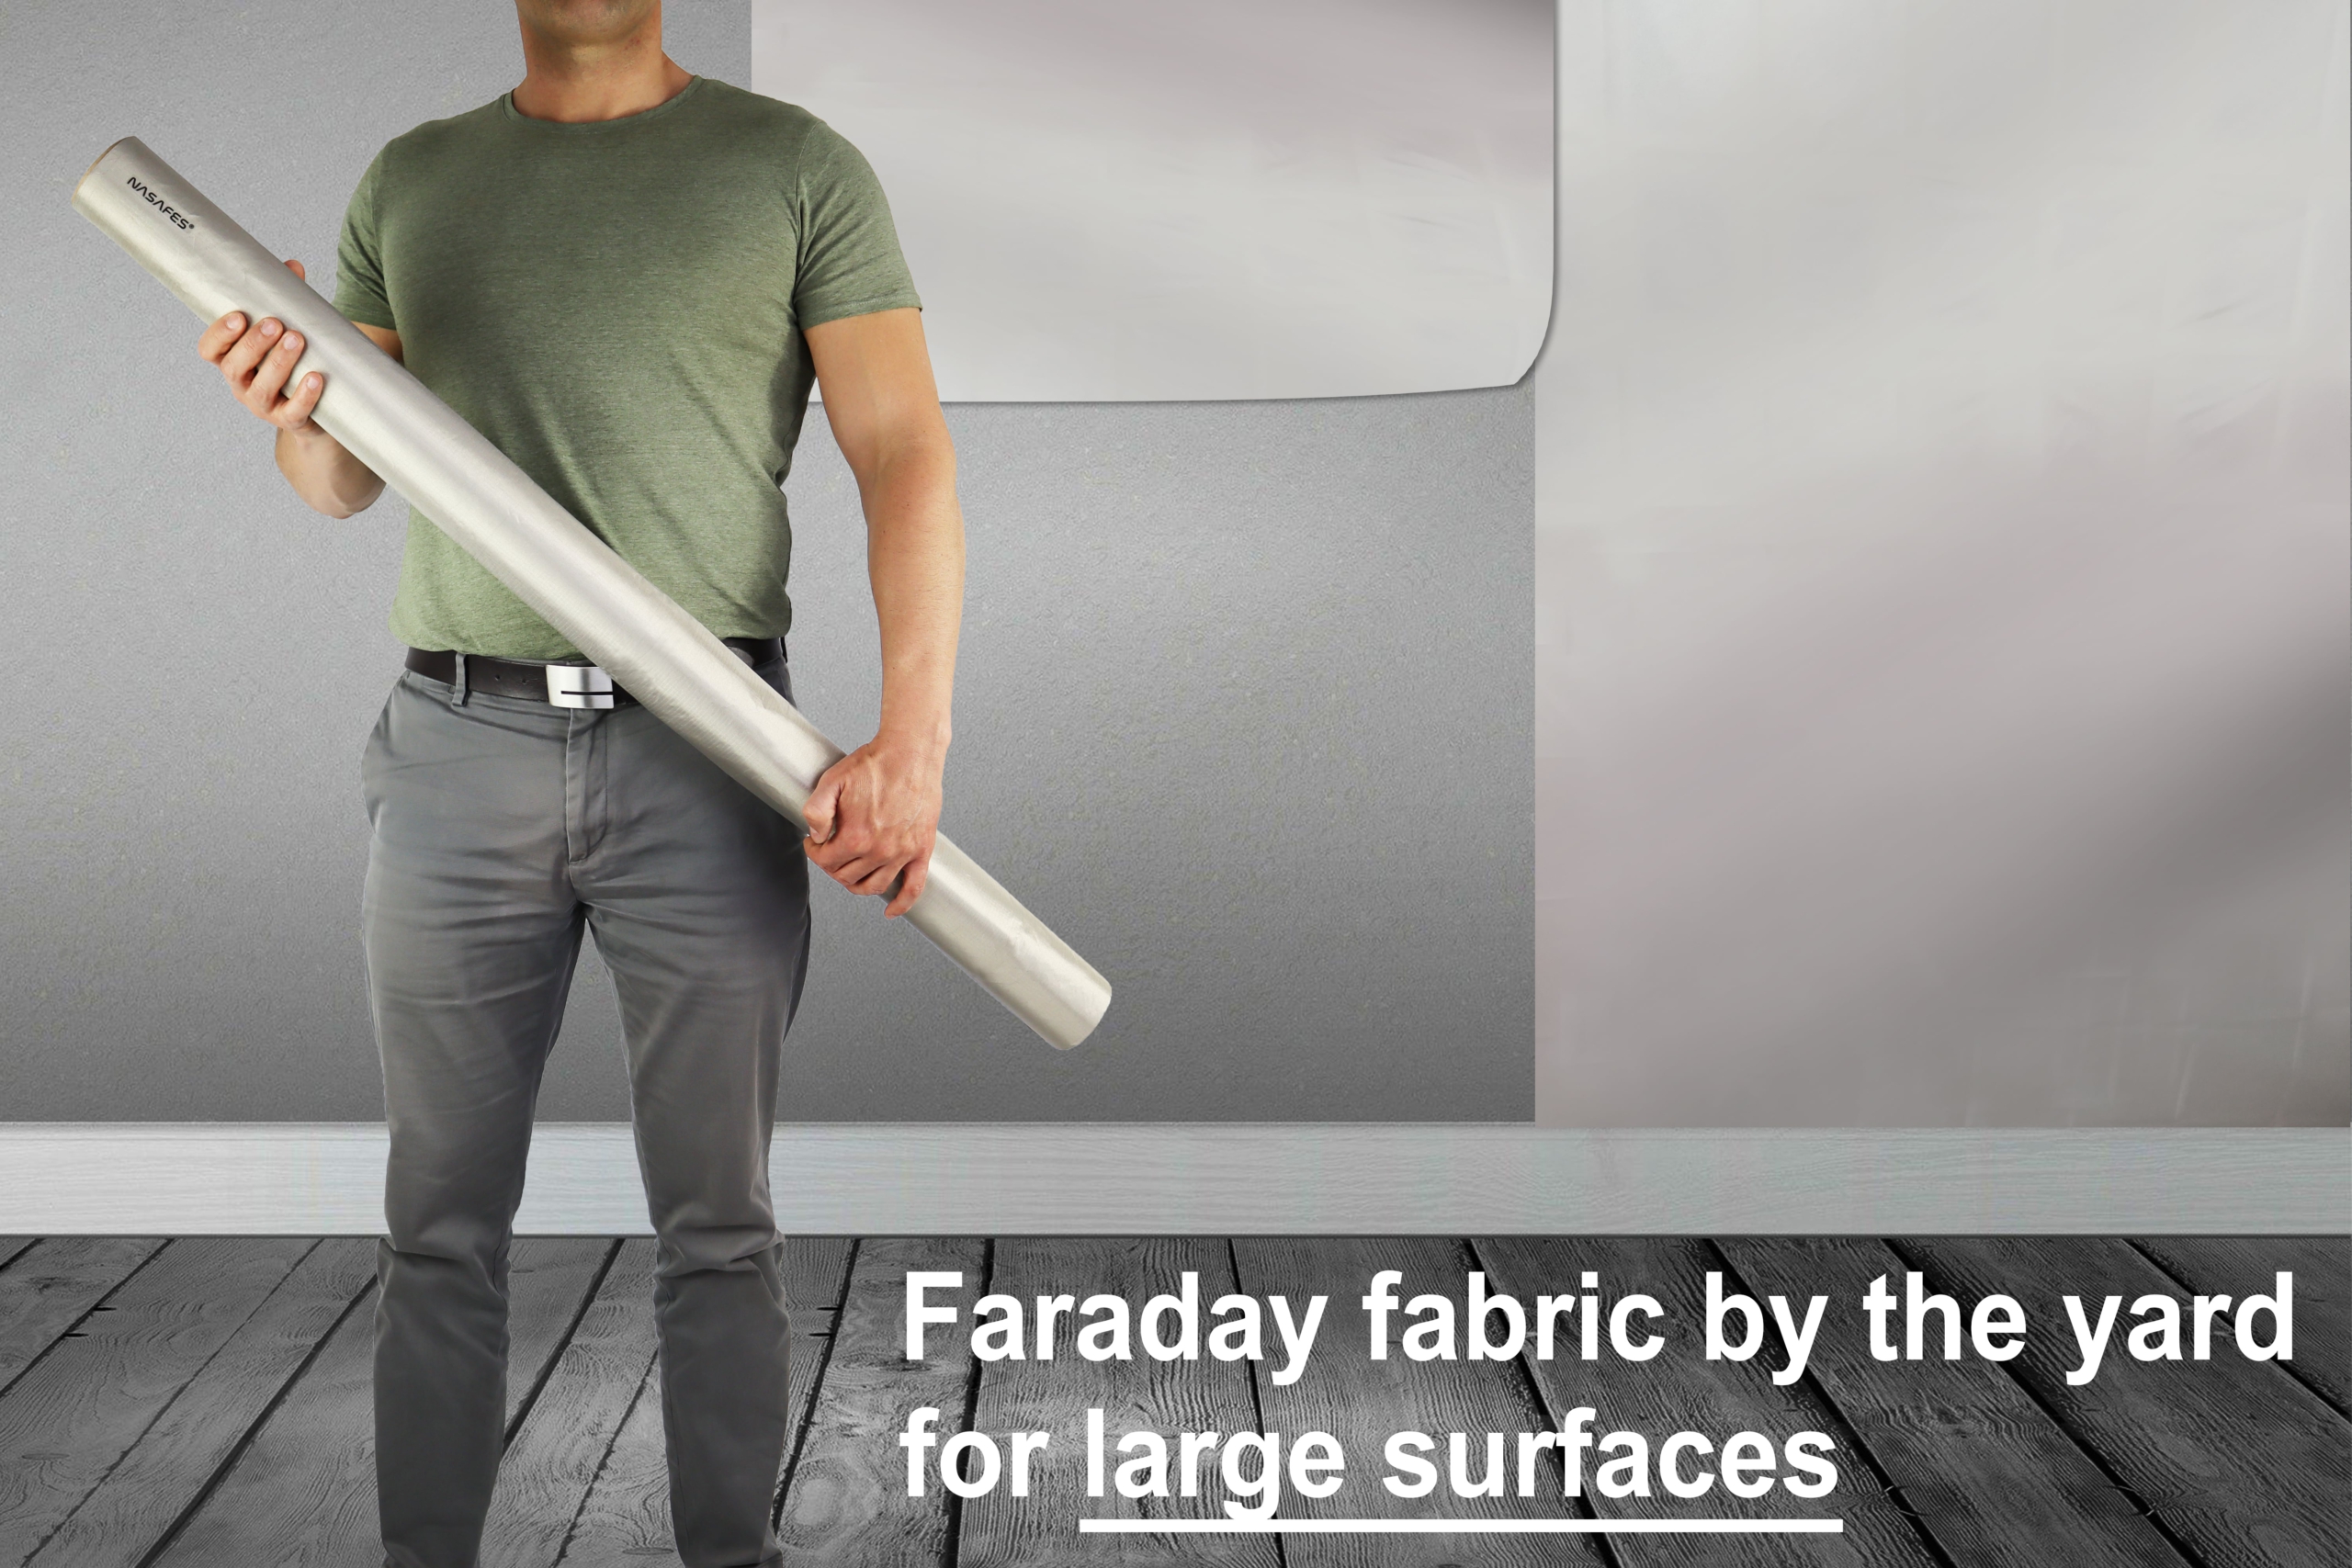 faraday fabric by the yard with a wall on the background where you can see that the farada fabric was attached to it.